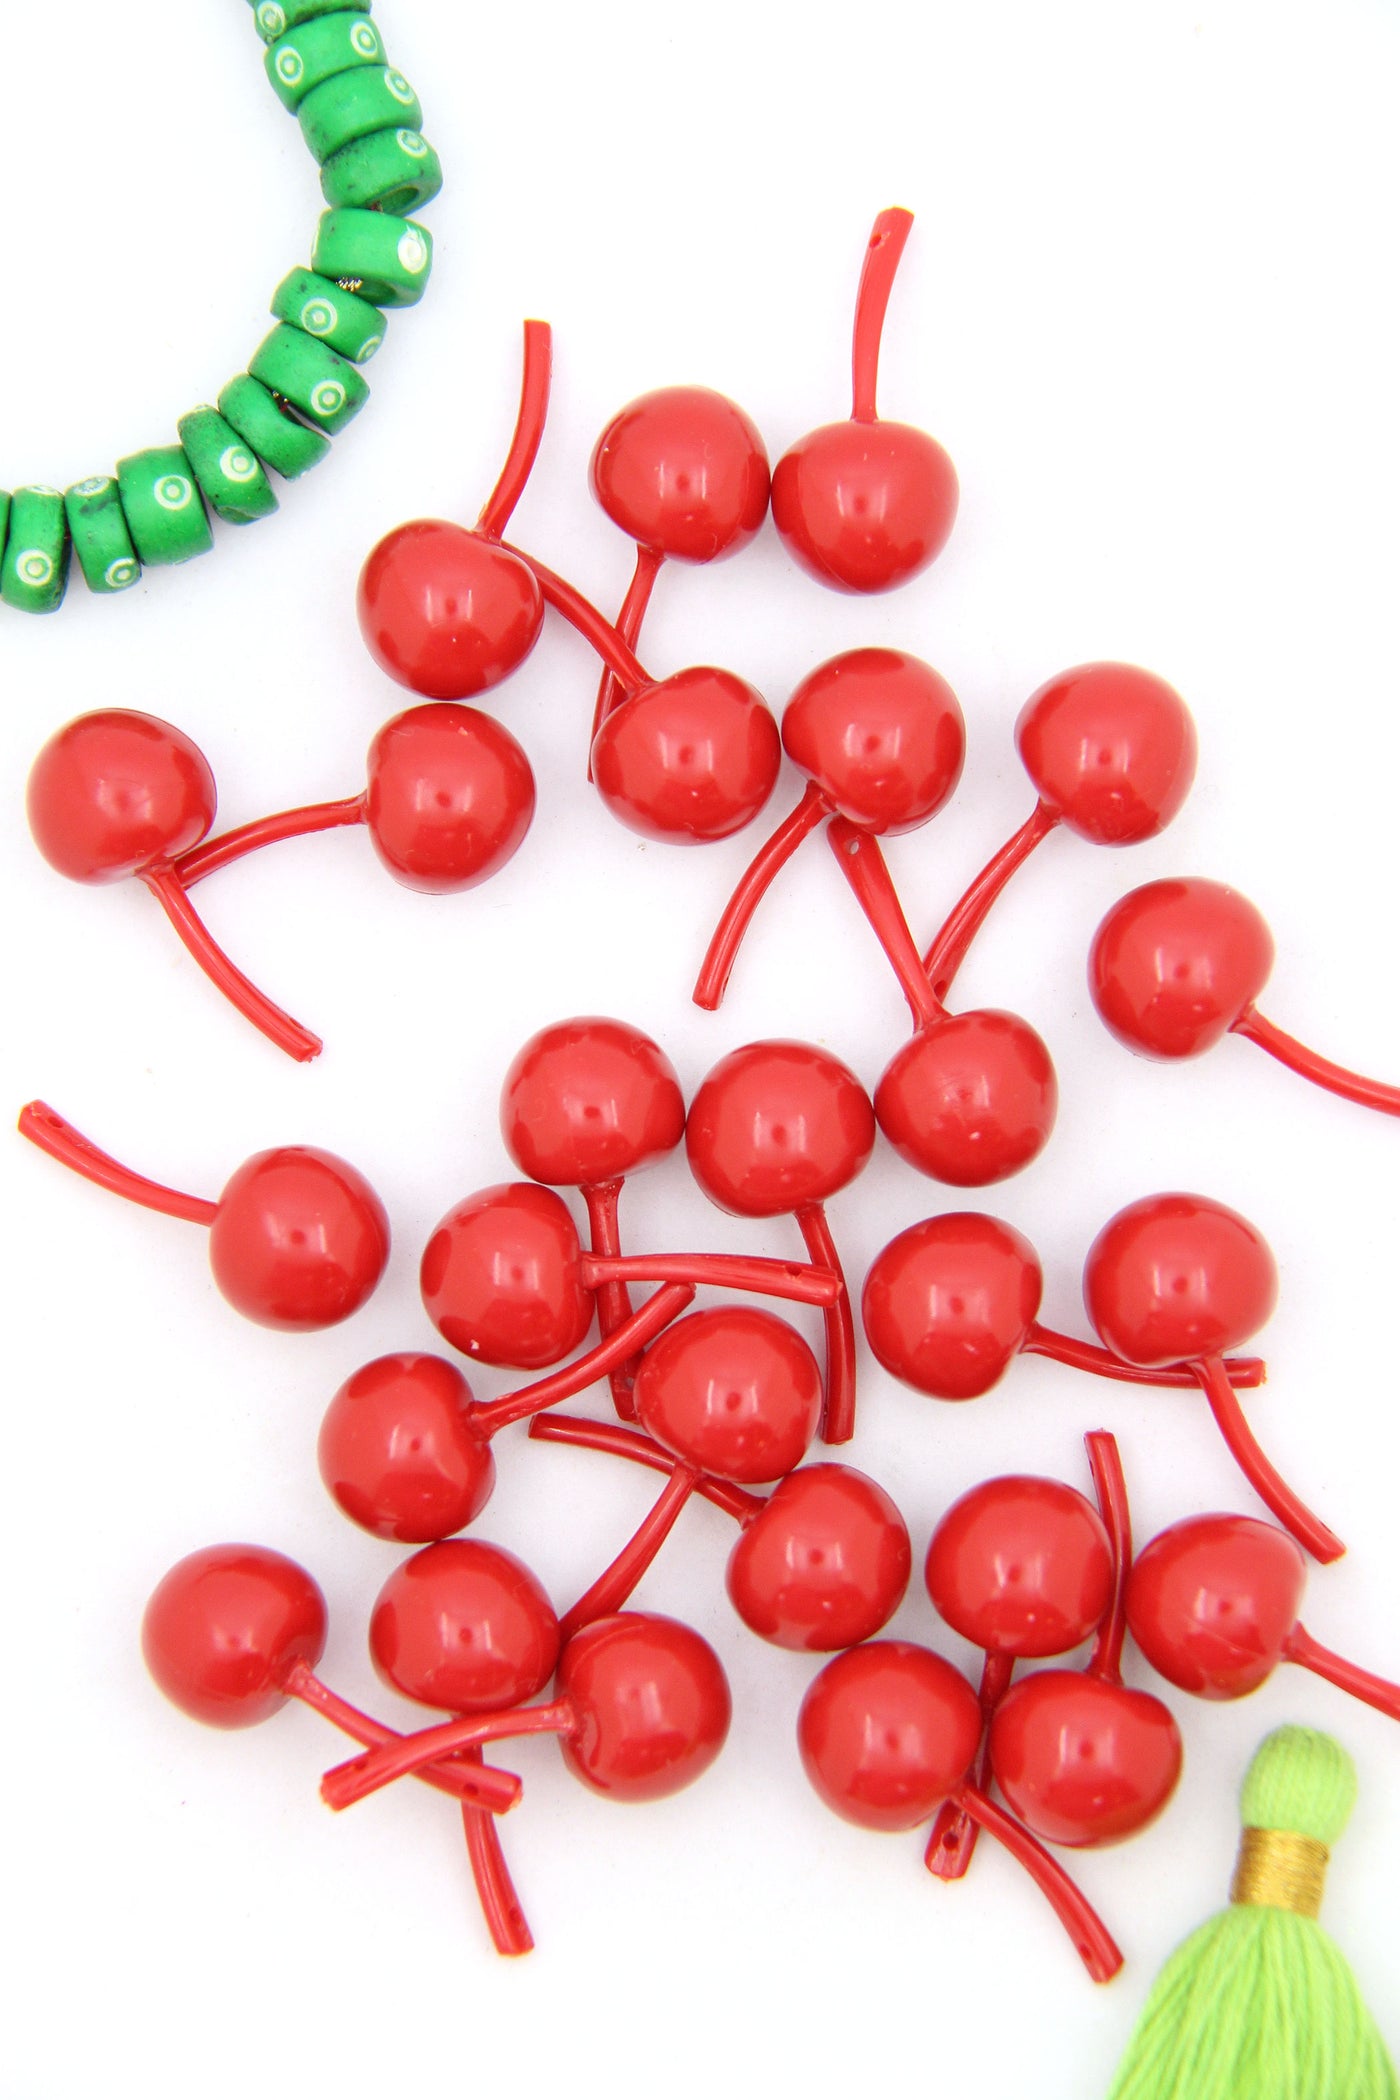 These sweet red cherries are incredibly delicious to look at! They will add a kitschy vibe 